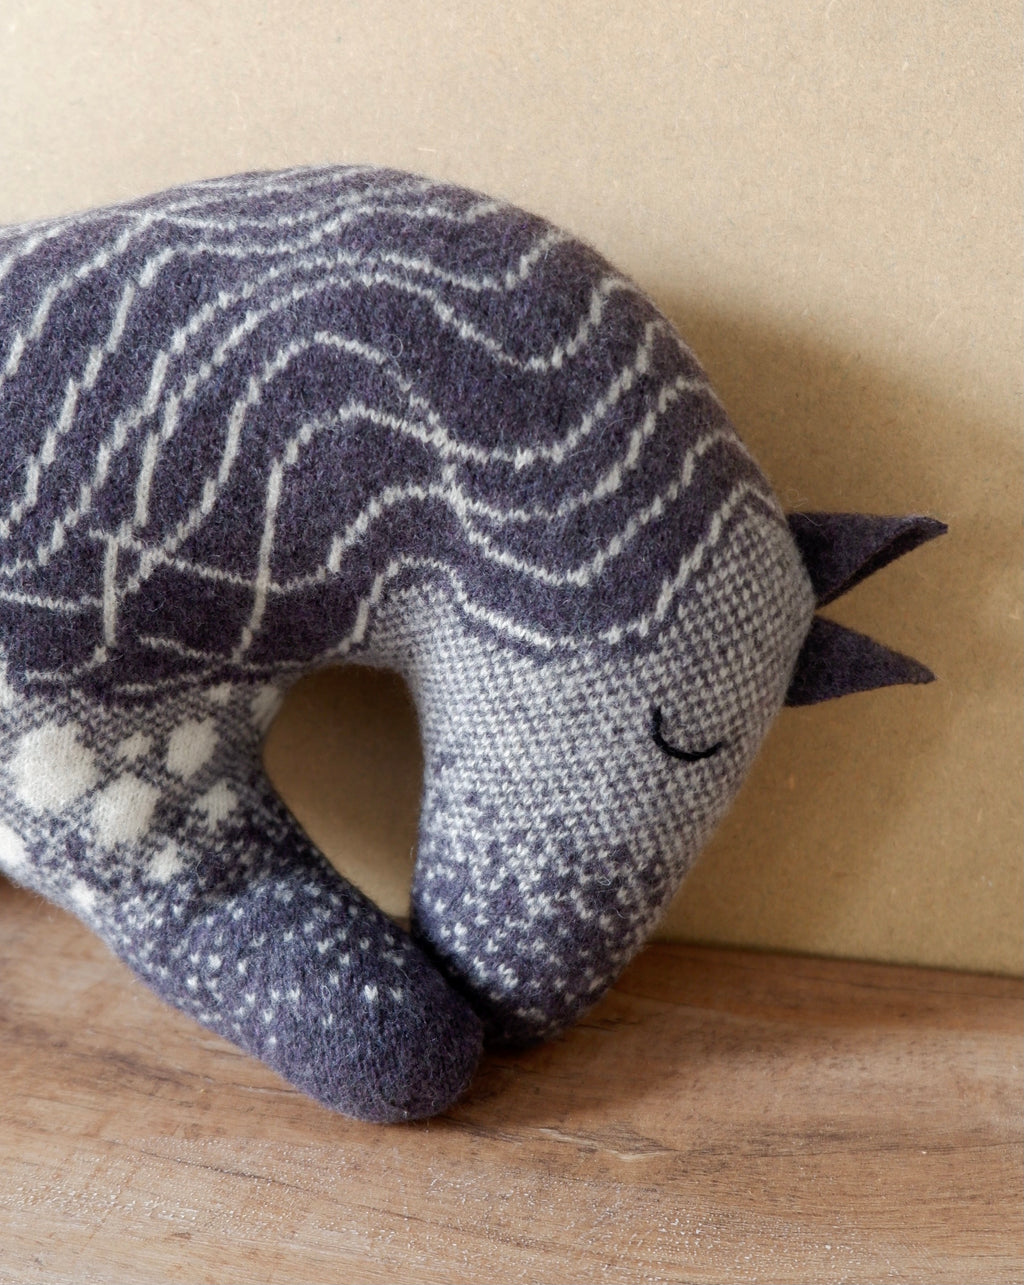 sally nencini handcrafted knitted woollen Dapple Horse homeware soft furnishing toy textiles